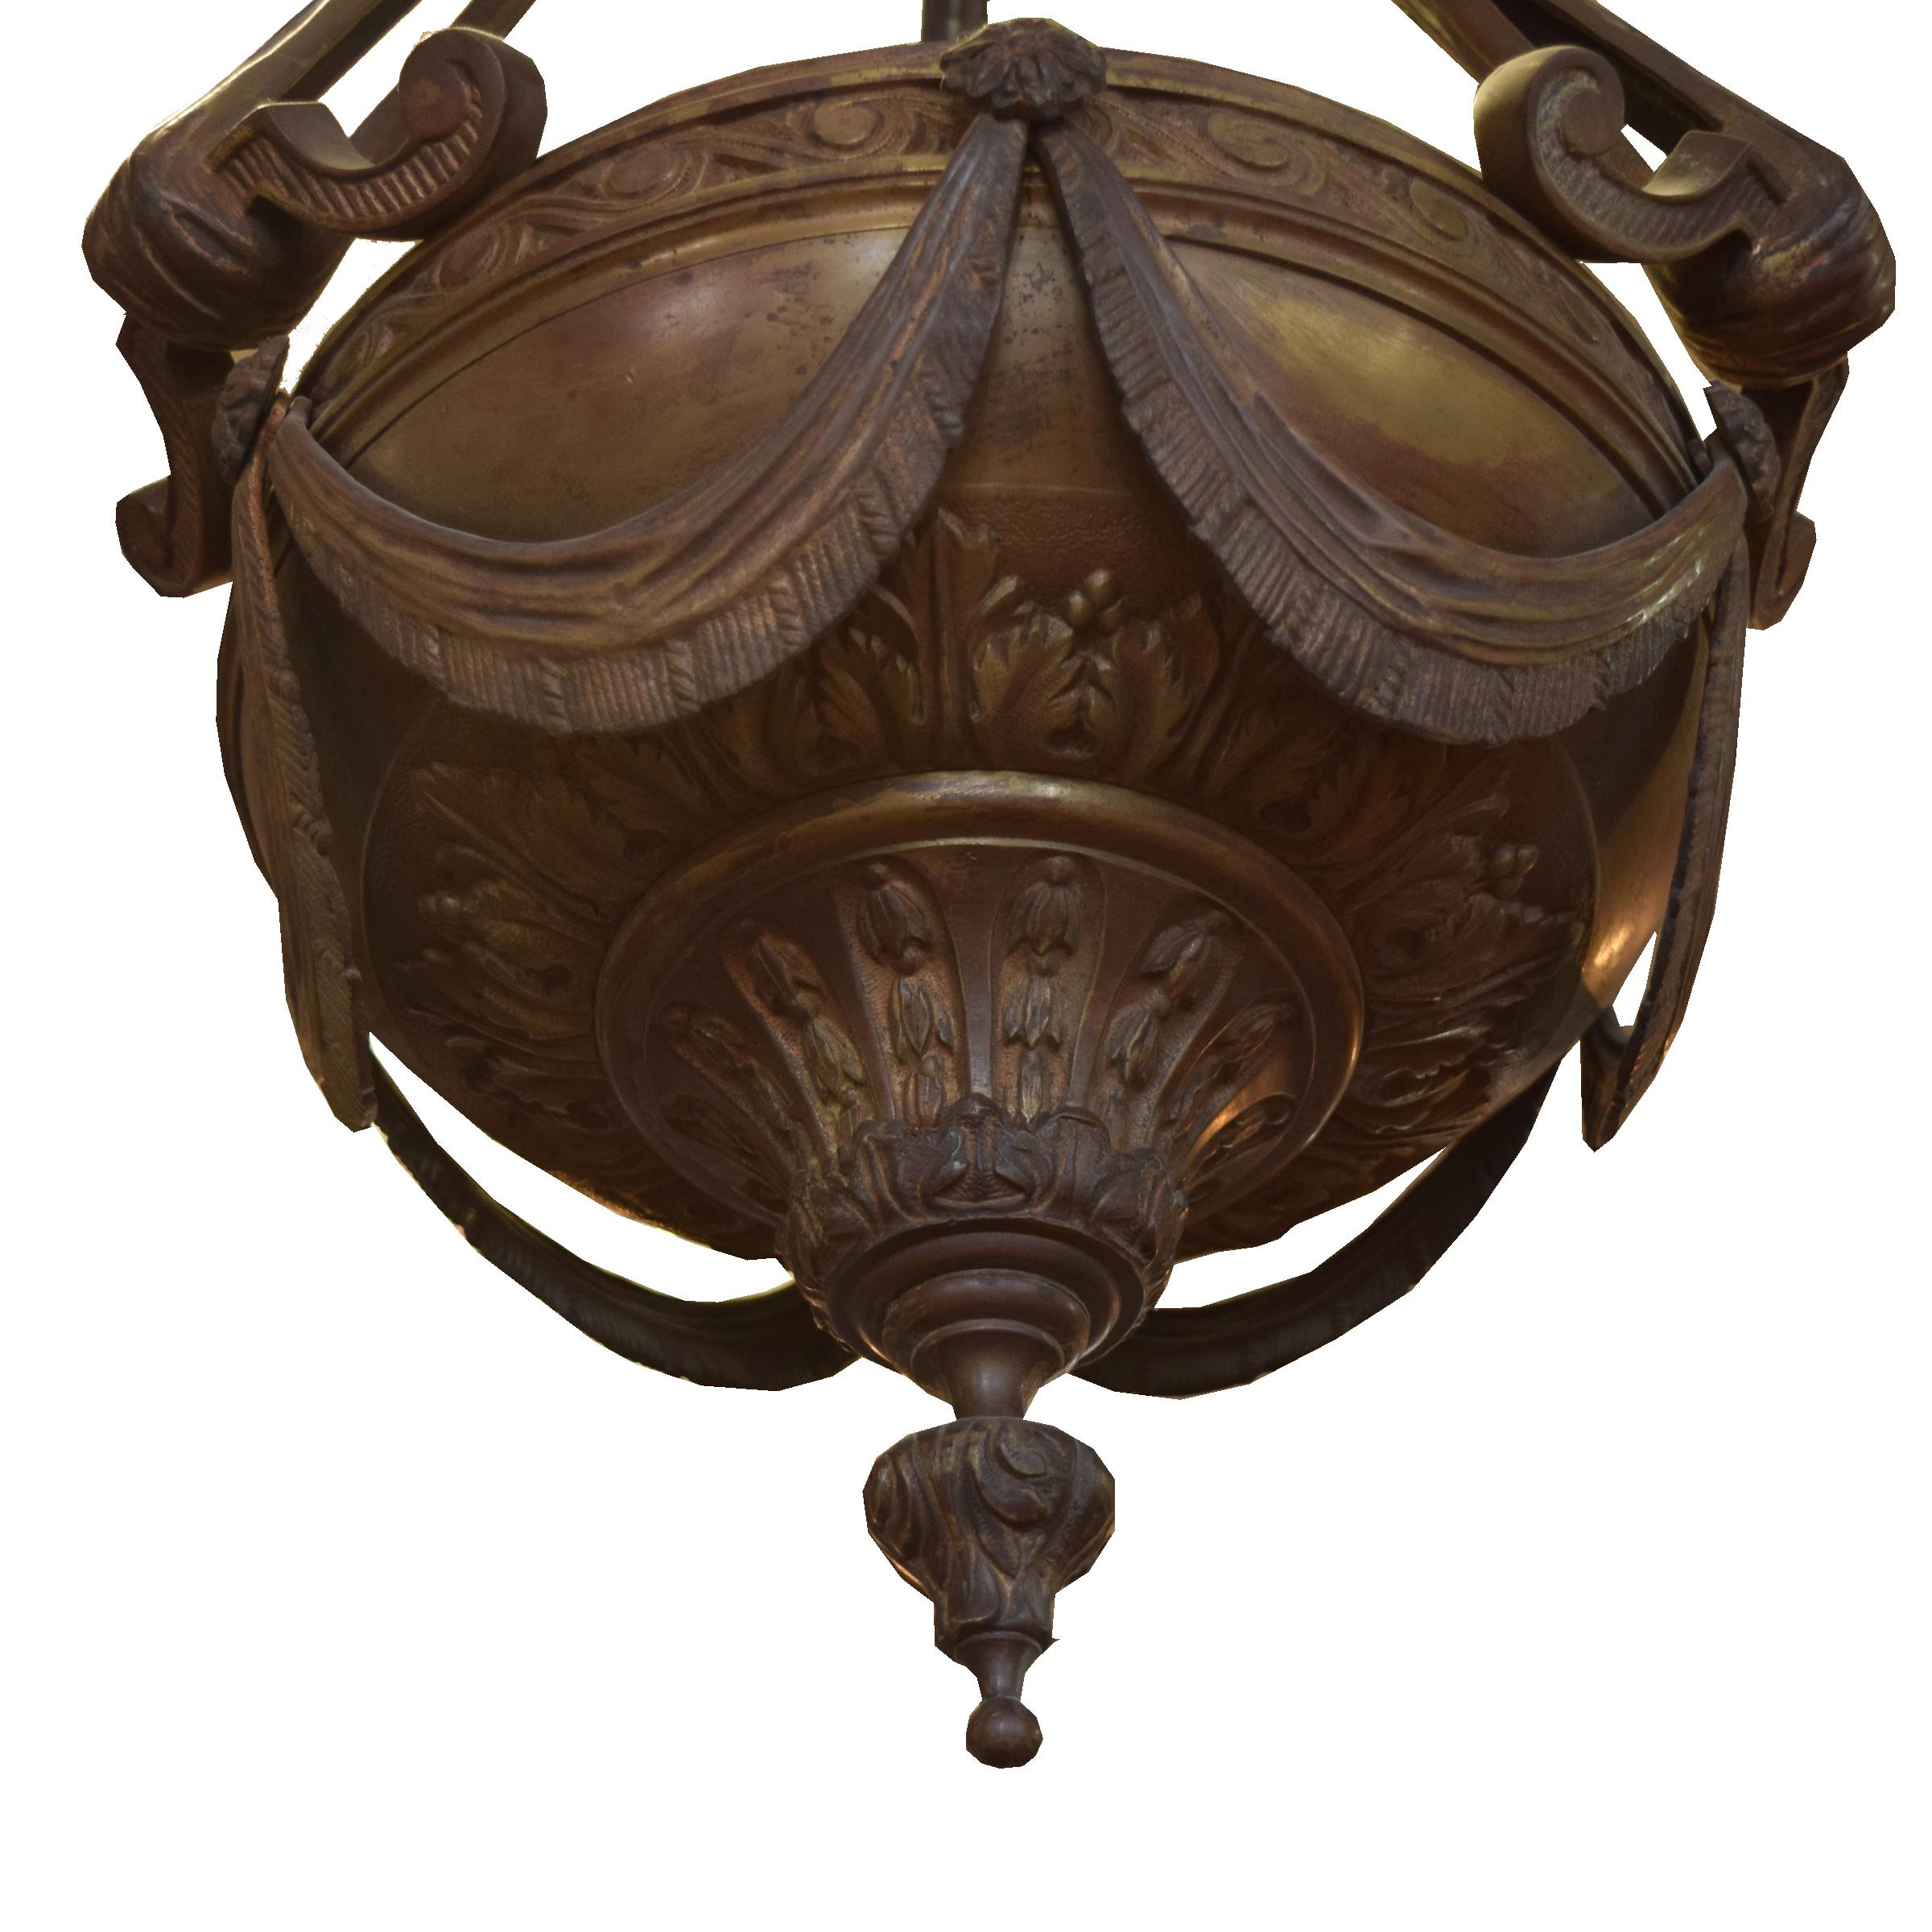 A beautifully cast bronze hanging light fixture with a bowl held by ribbons, all cast in bronze.
Required wiring.